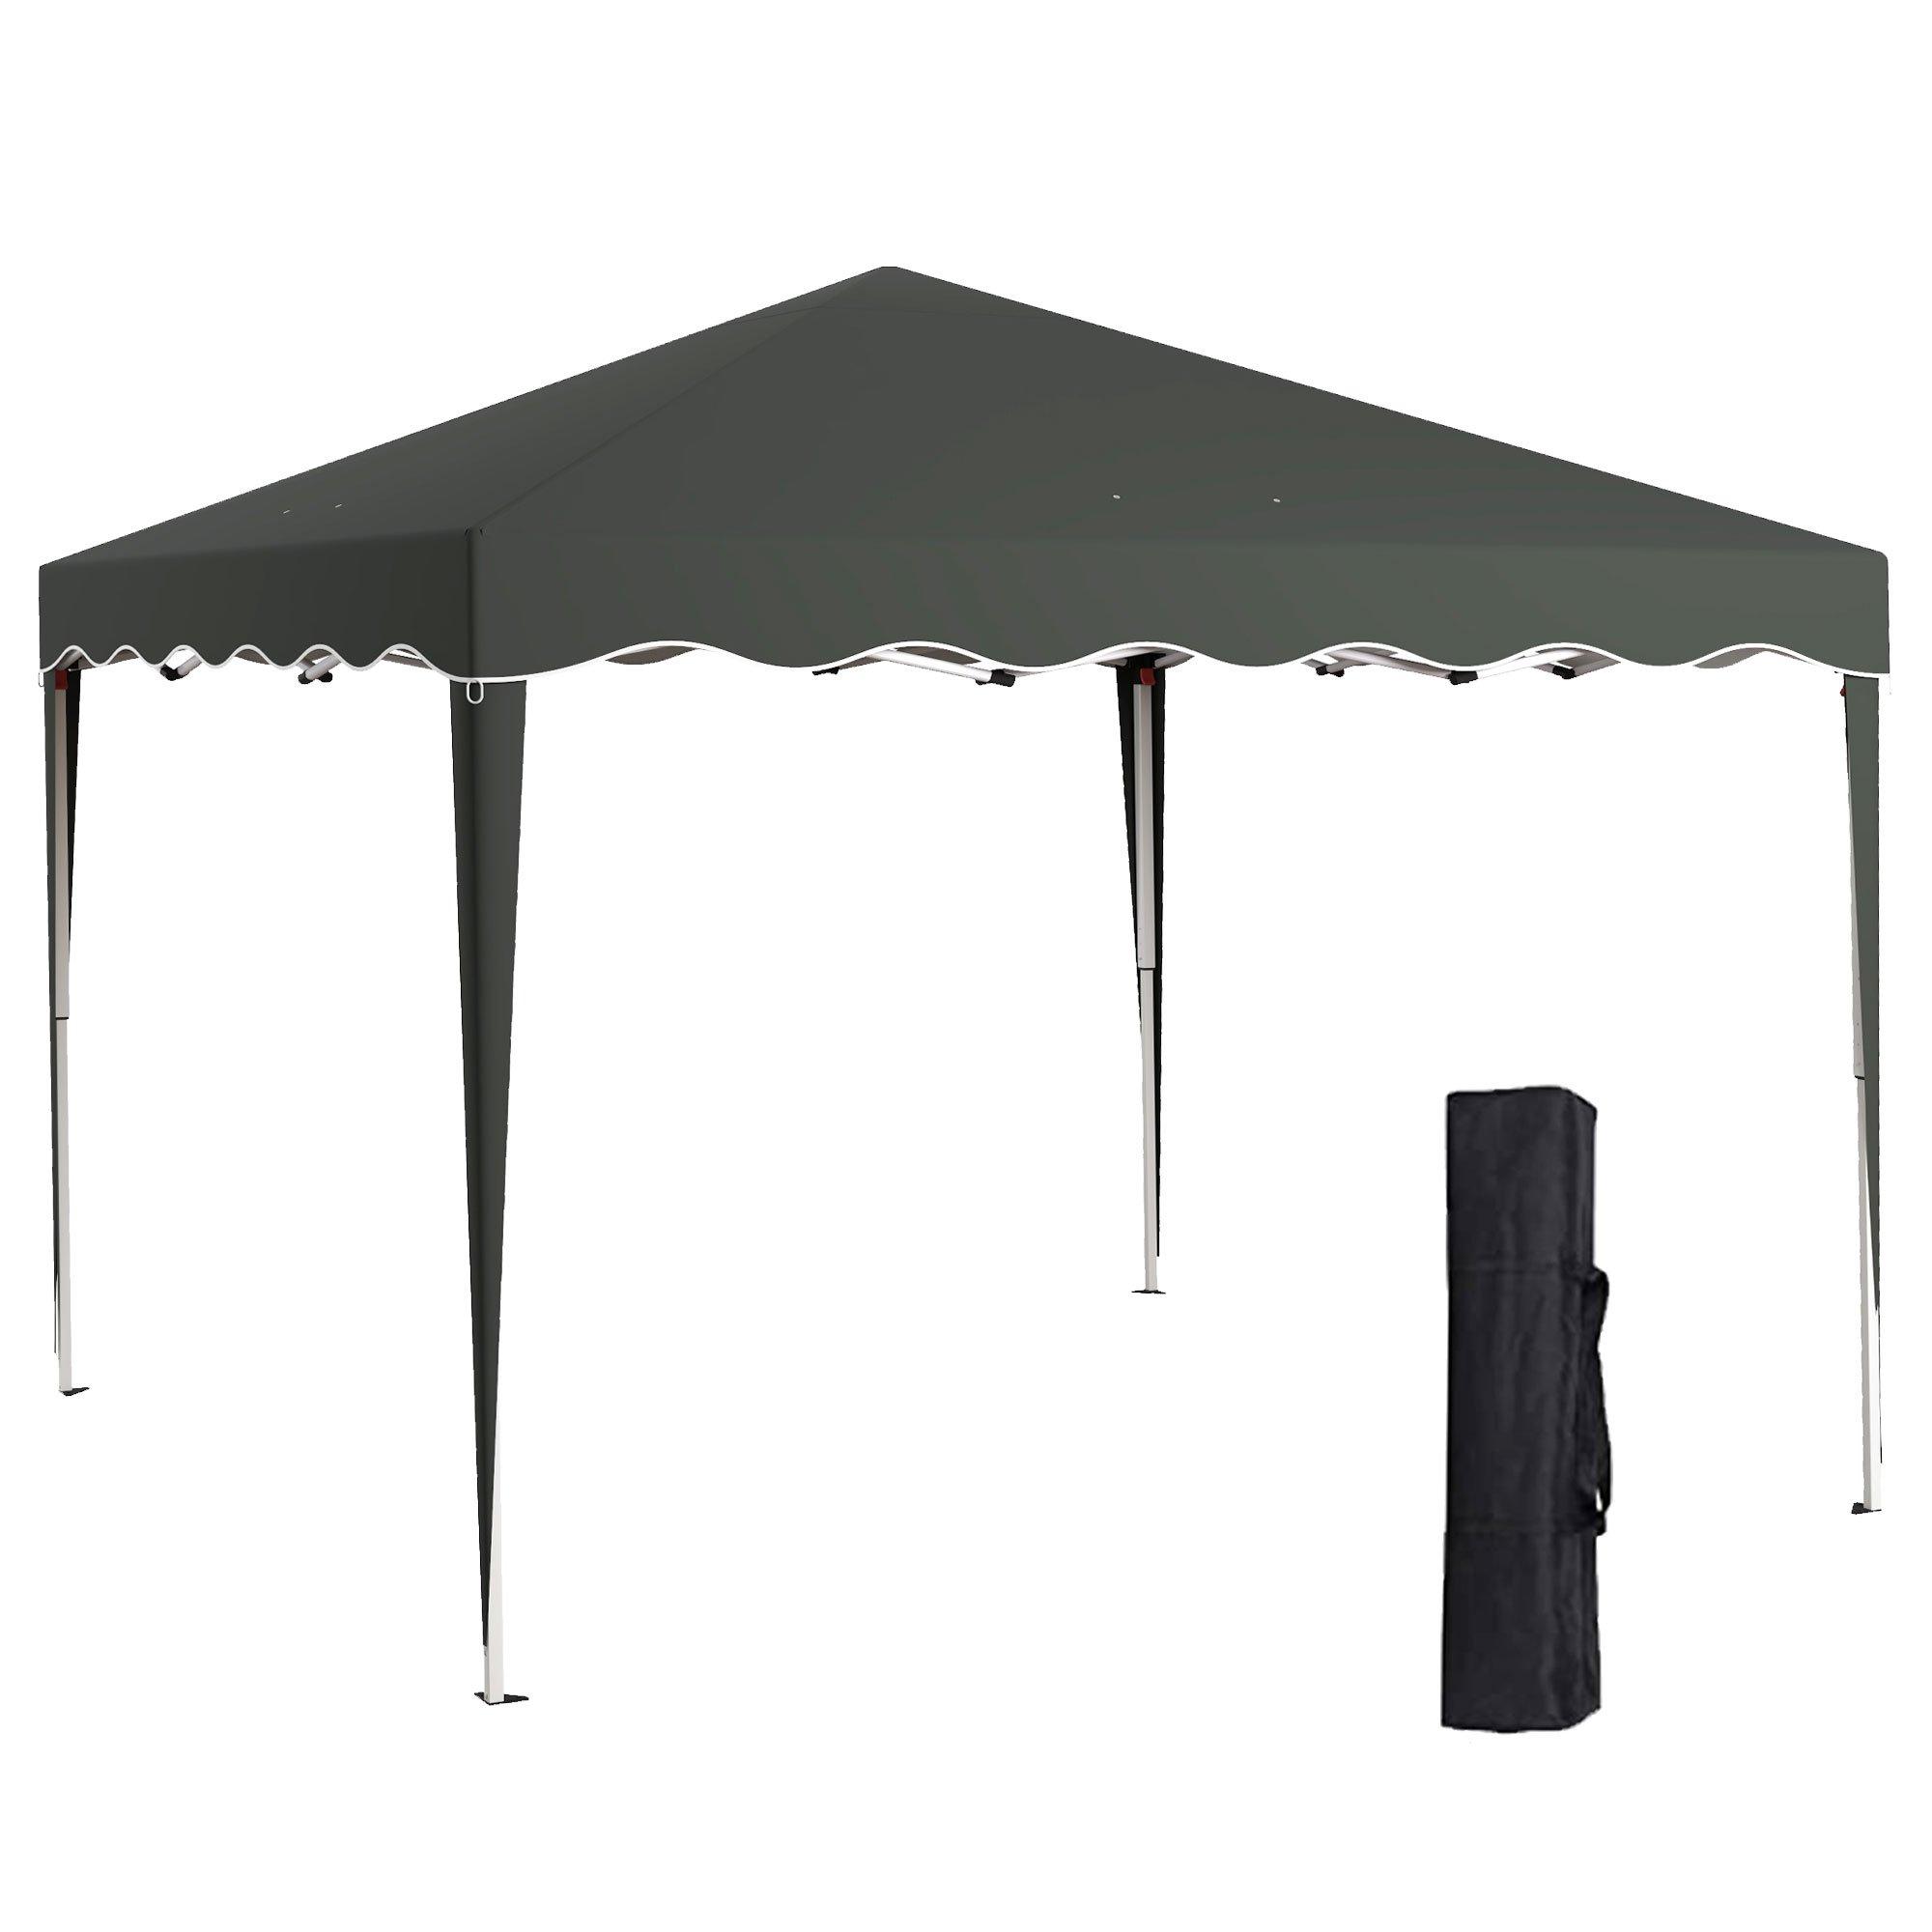 3x3(m) Pop Up Gazebo Canopy Portable Tent Event Shelter with Carry Bag